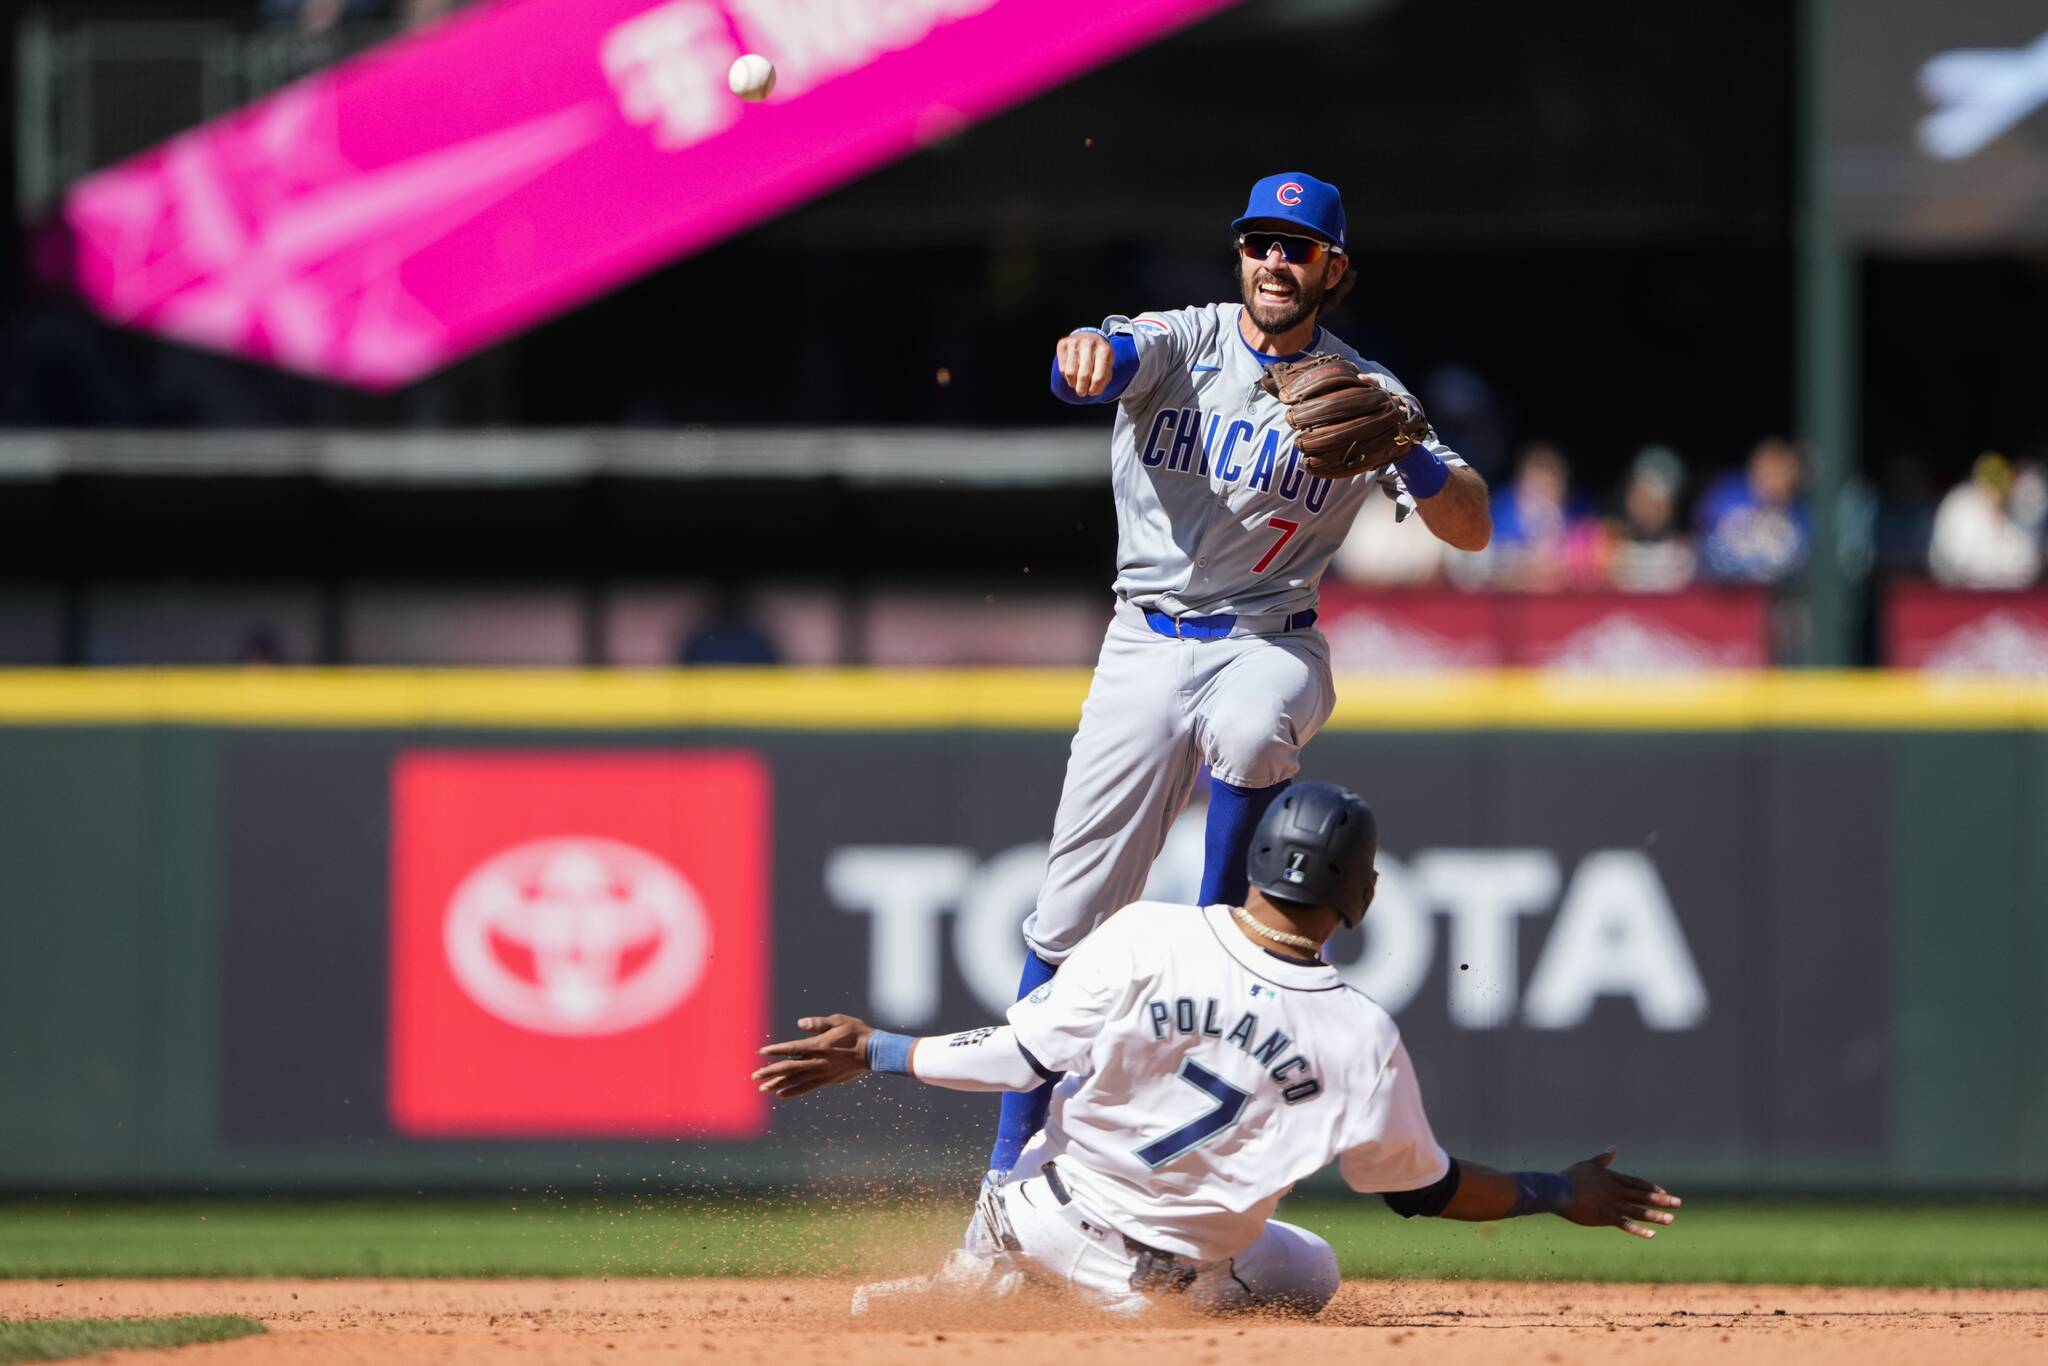 Chicago Cubs shortstop Dansby Swanson, top, forces out the Seattle Mariners’ Jorge Polanco (7) at second base and makes the throw to first for the double play against Mariners’ Ty France to end the eighth inning of Sunday’s game in Seattle. (AP Photo/Lindsey Wasson)